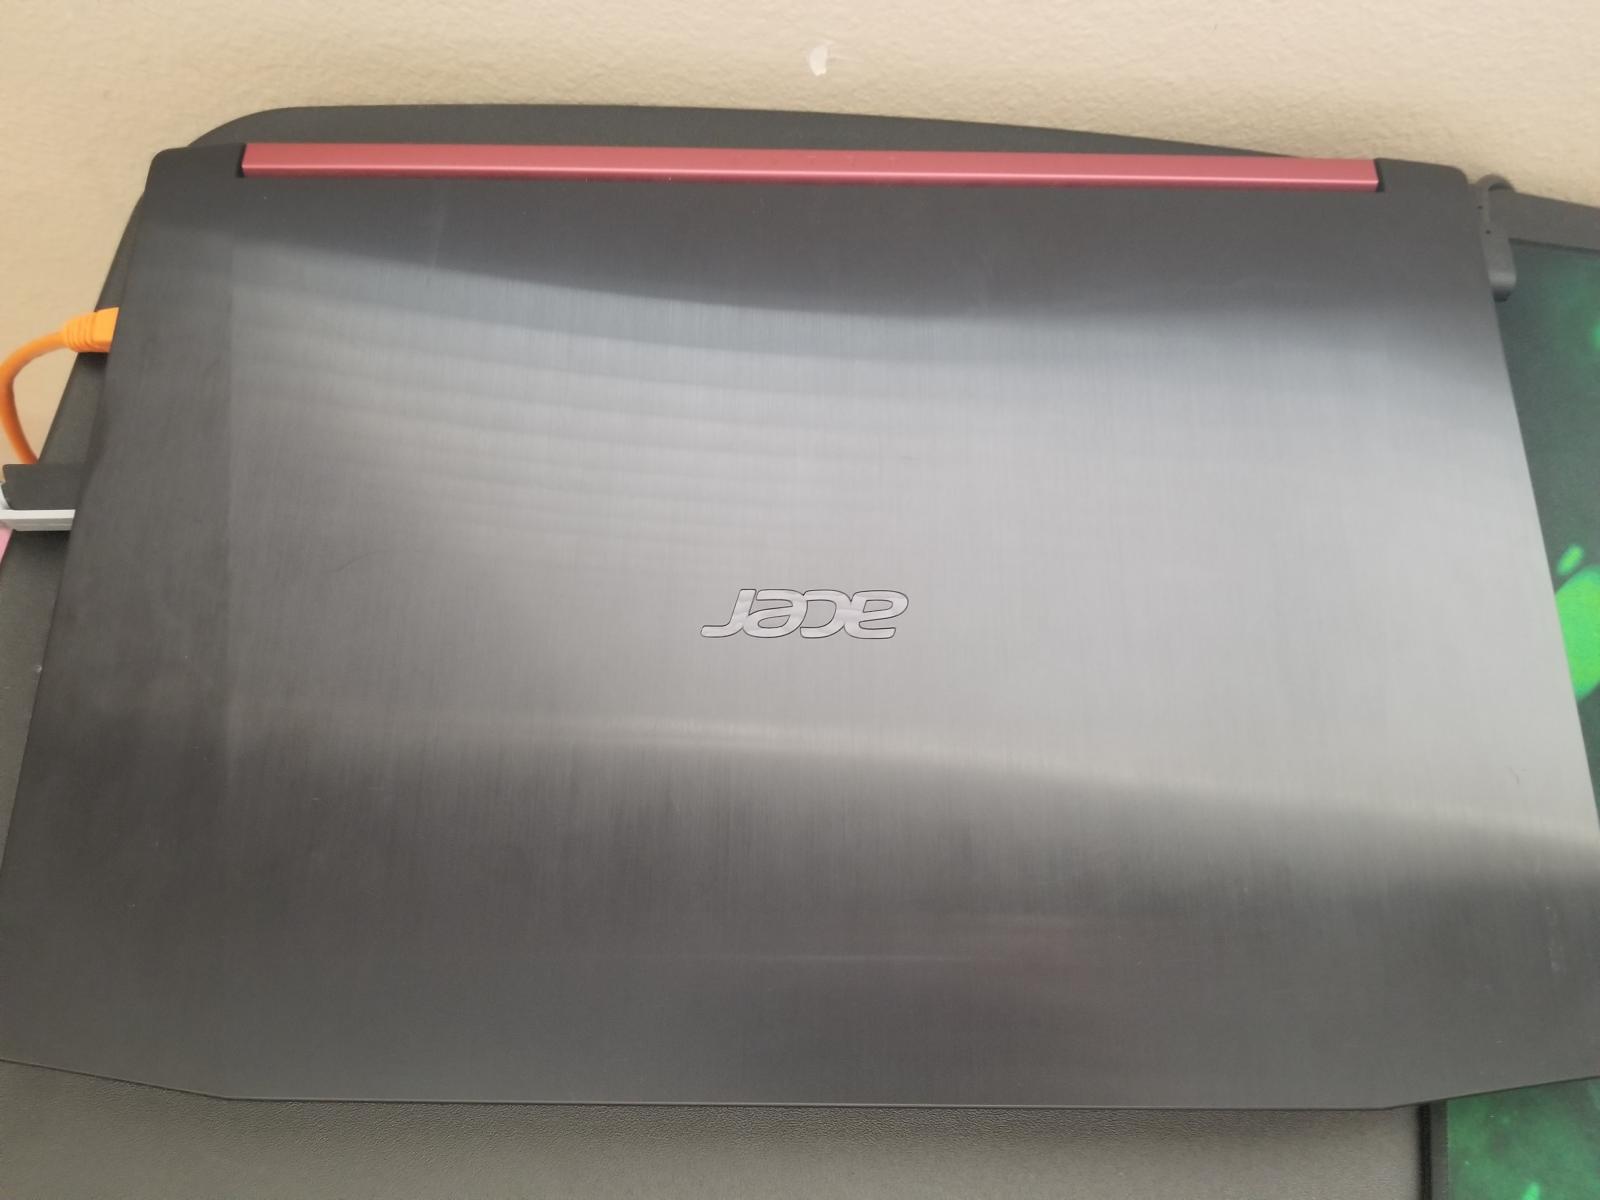 For sale Acer Nitro 5 Gaming laptop + extra 1TB Seagate Firecuda hybrid drive